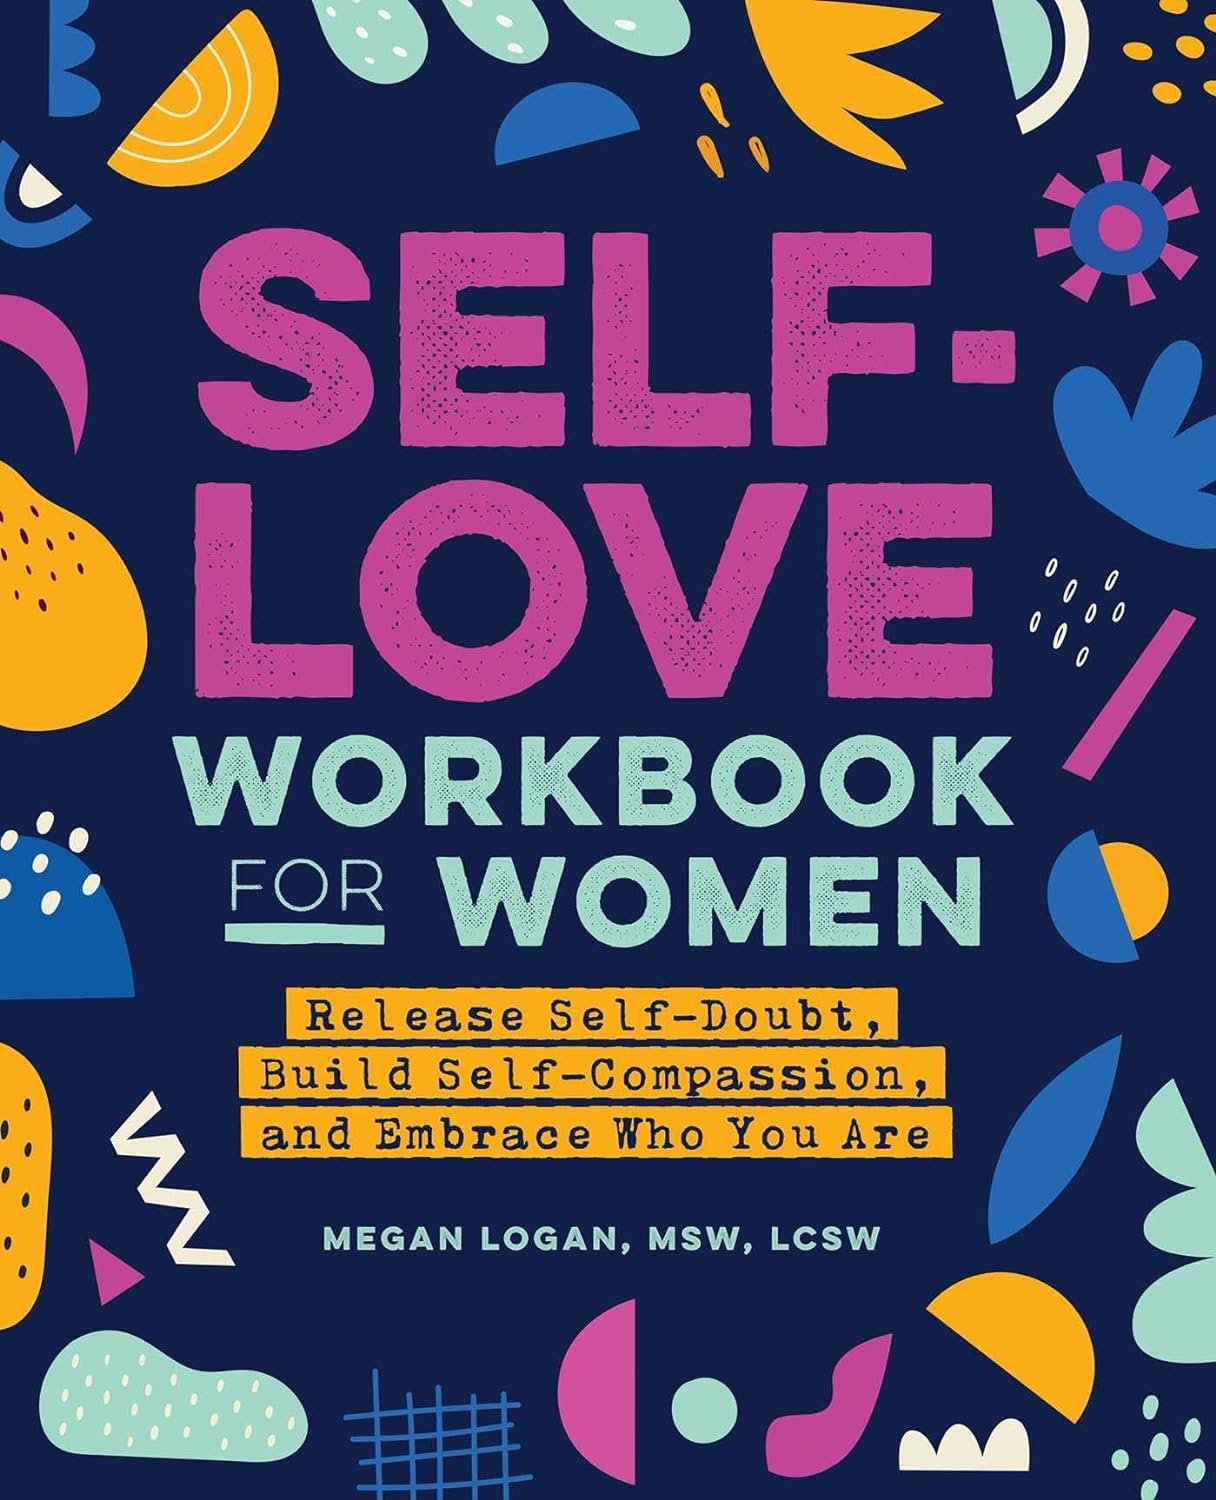 Self-Love Workbook for Women: Release Self-Doubt, Build Self-Compassion, and Embrace Who You Are (Self-Help Workbooks for Women)     Paperback – September 29, 2020